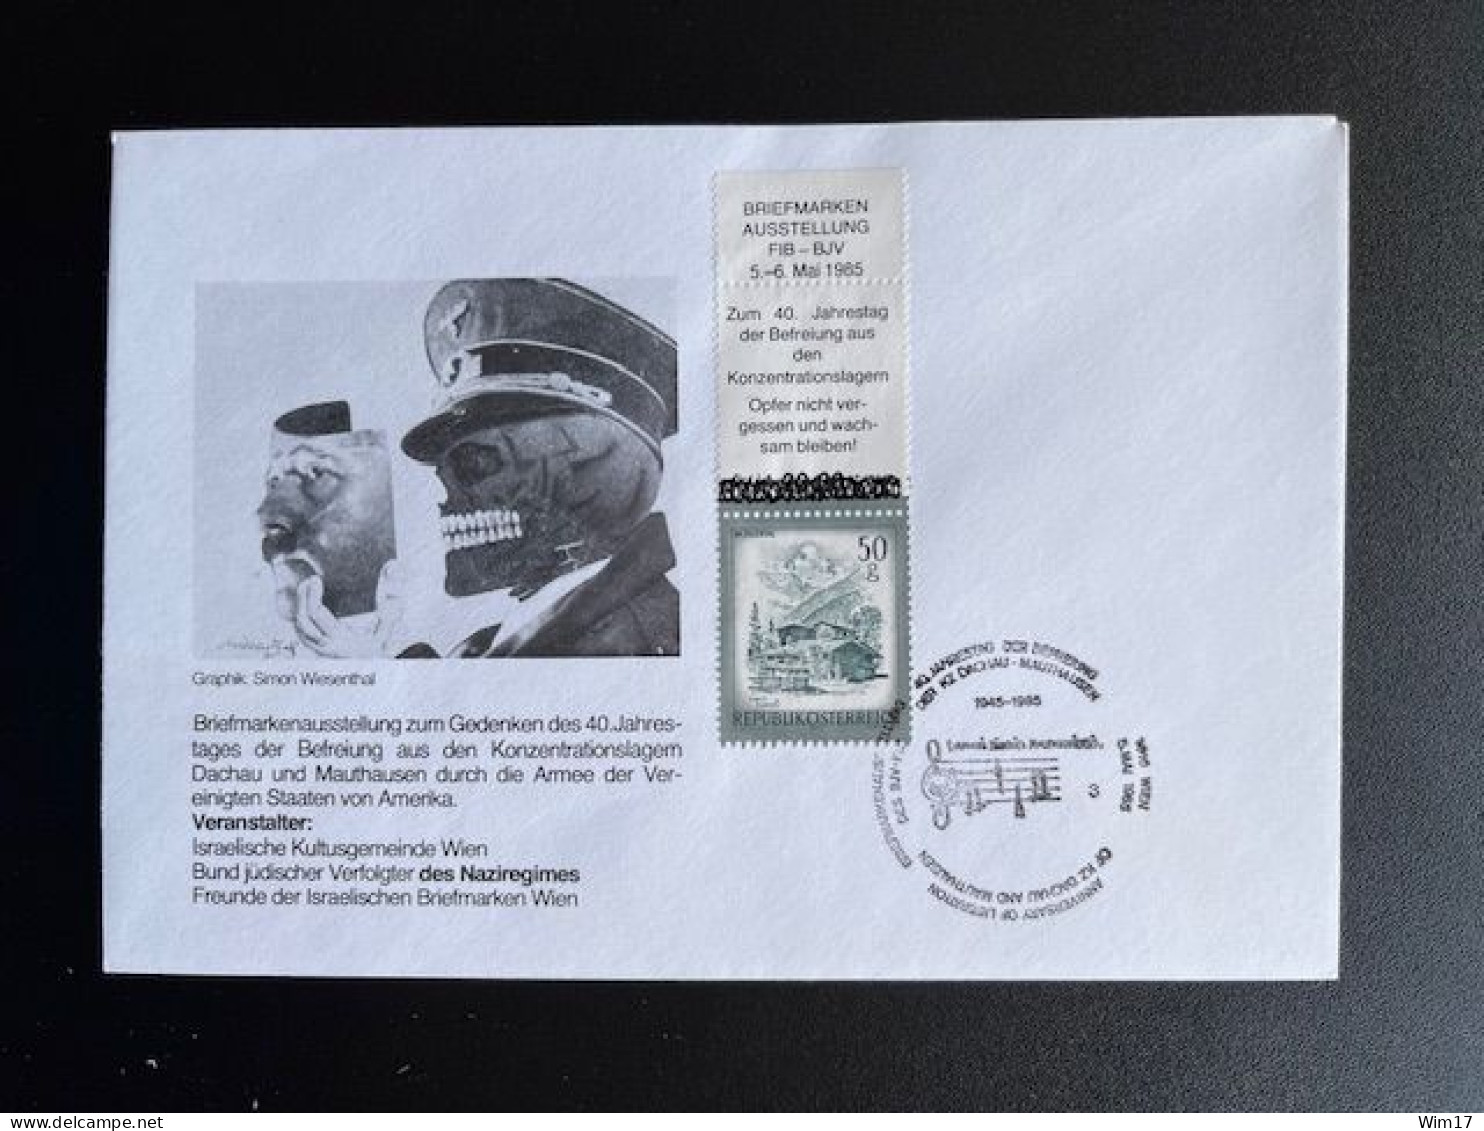 AUSTRIA 1985 SPECIAL COVER 40 YEARS LIBERATION OF DACHAU AND MAUTHAUSEN 05-05-1985 OOSTENRIJK OSTERREICH JUDAICA - Covers & Documents